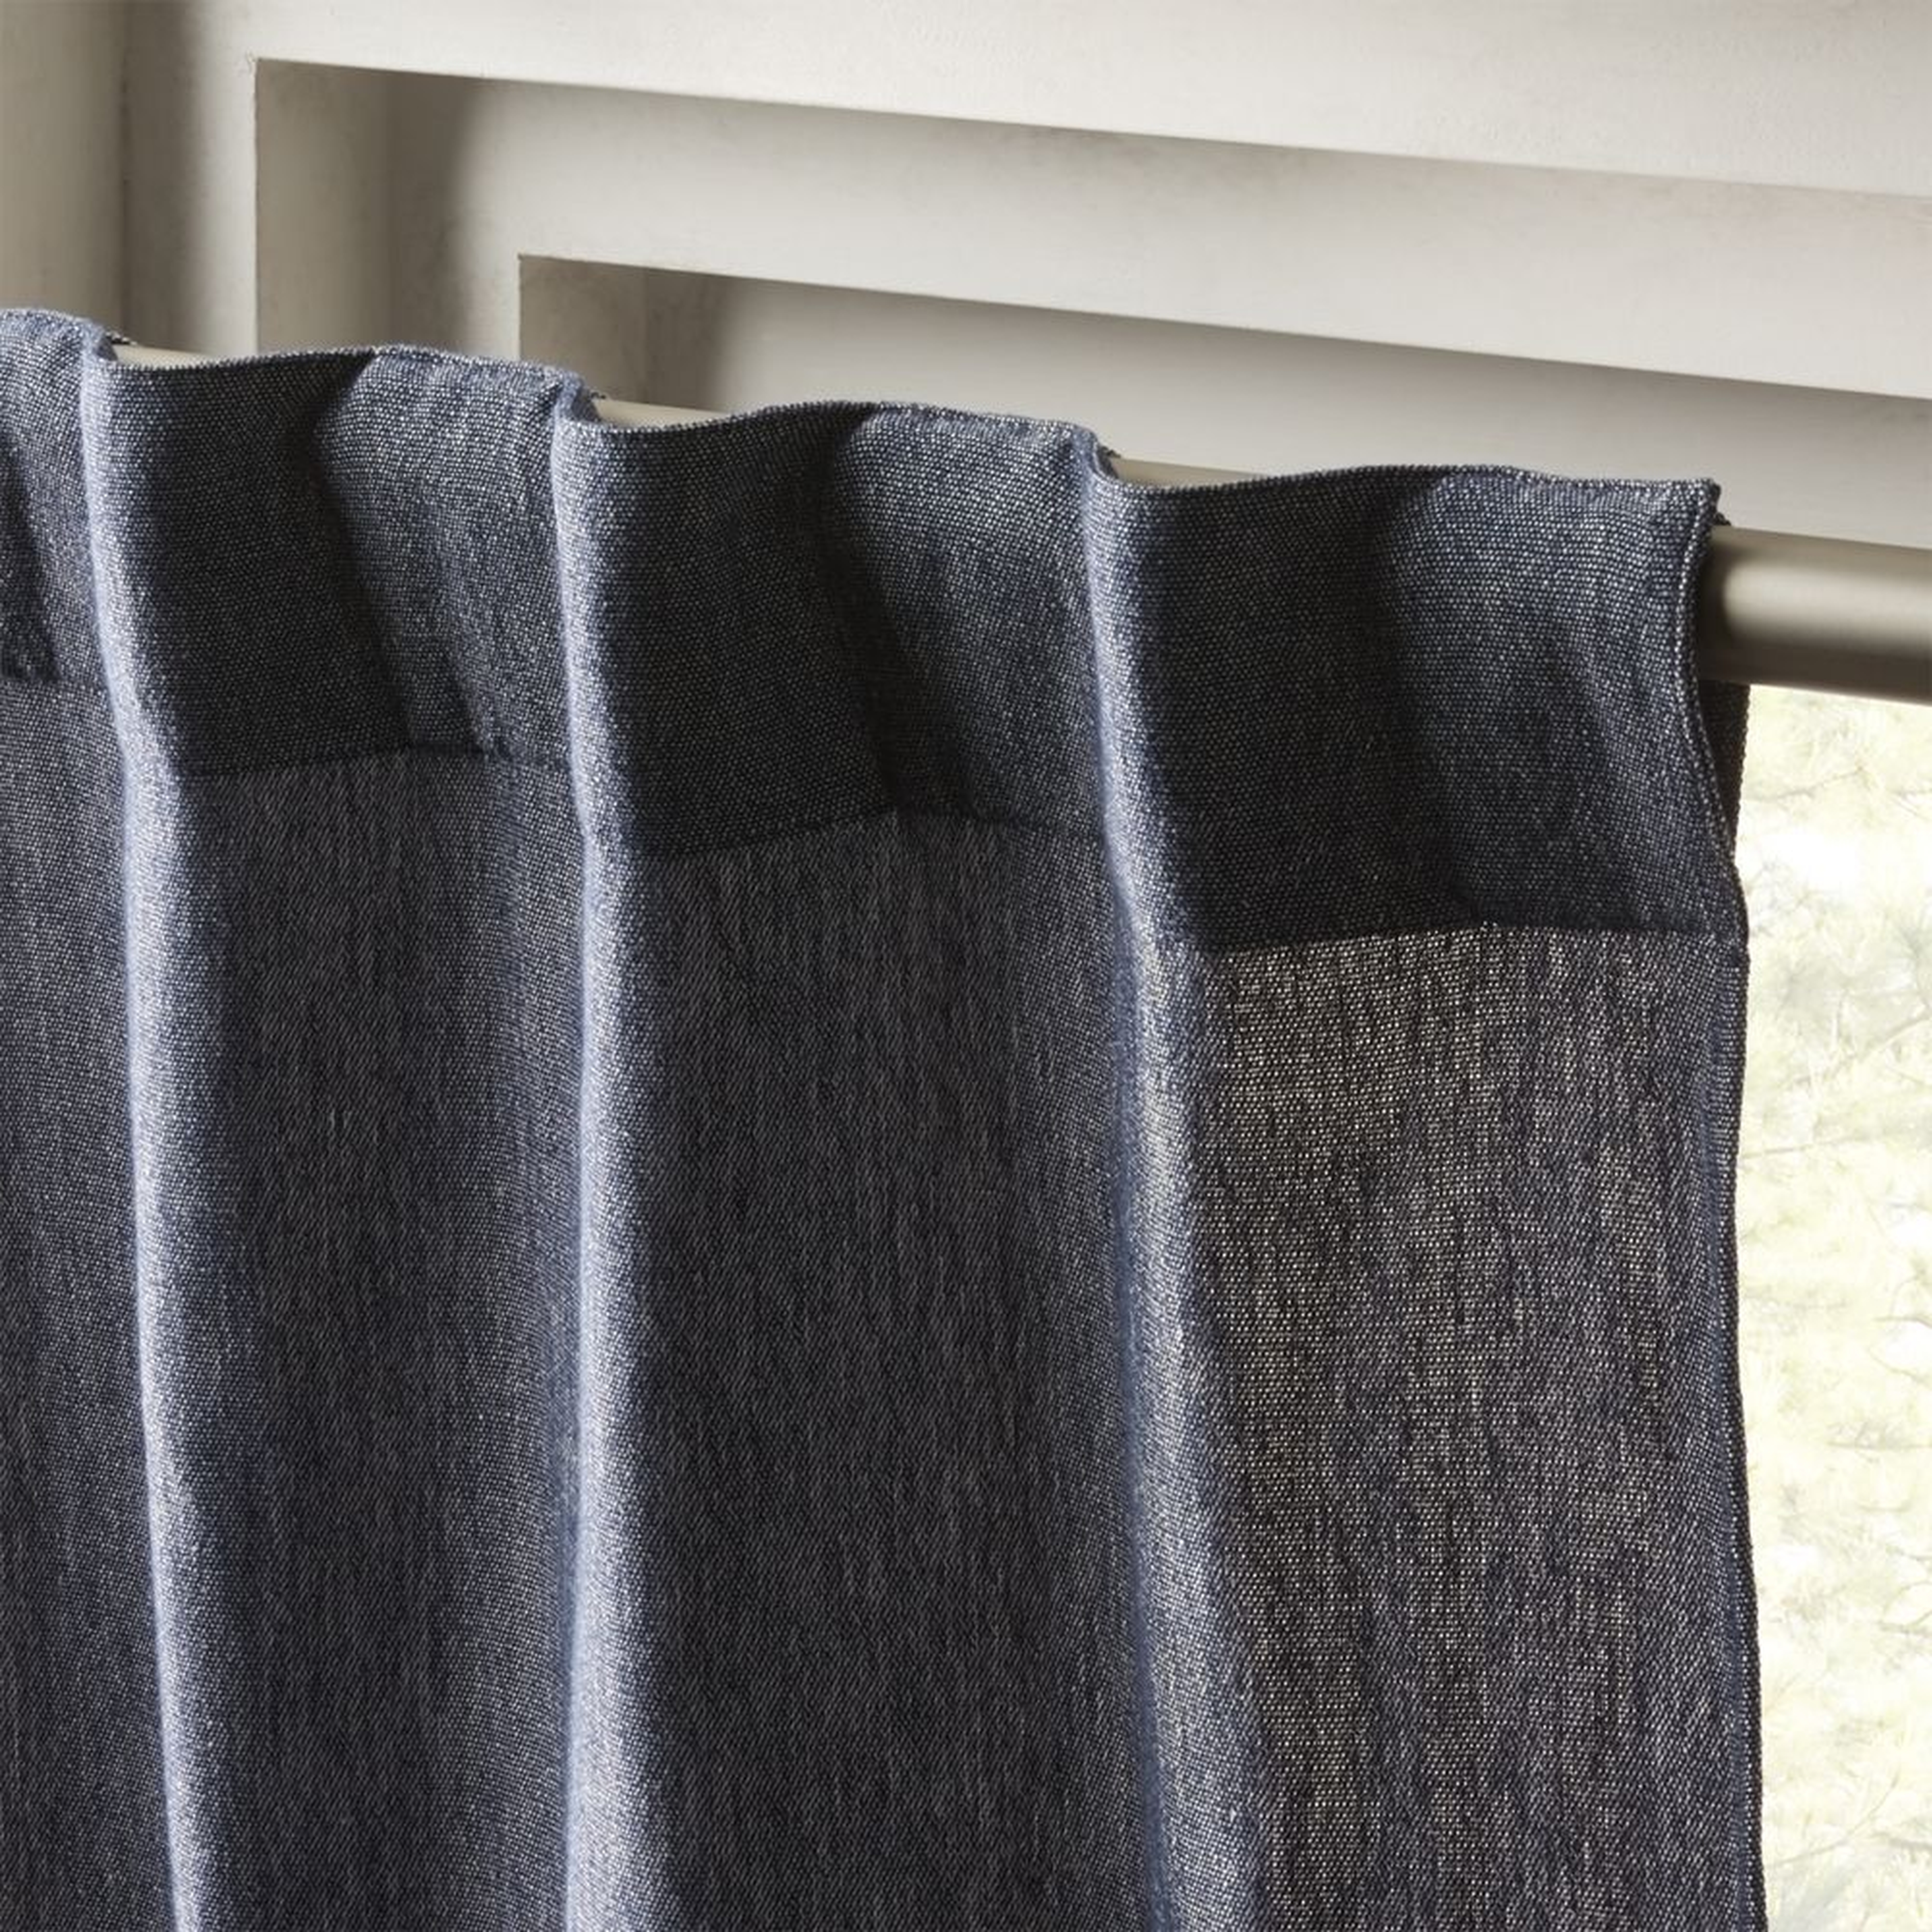 "Weekendr Blue Chambray Curtain Panel 48""x108""" - CB2